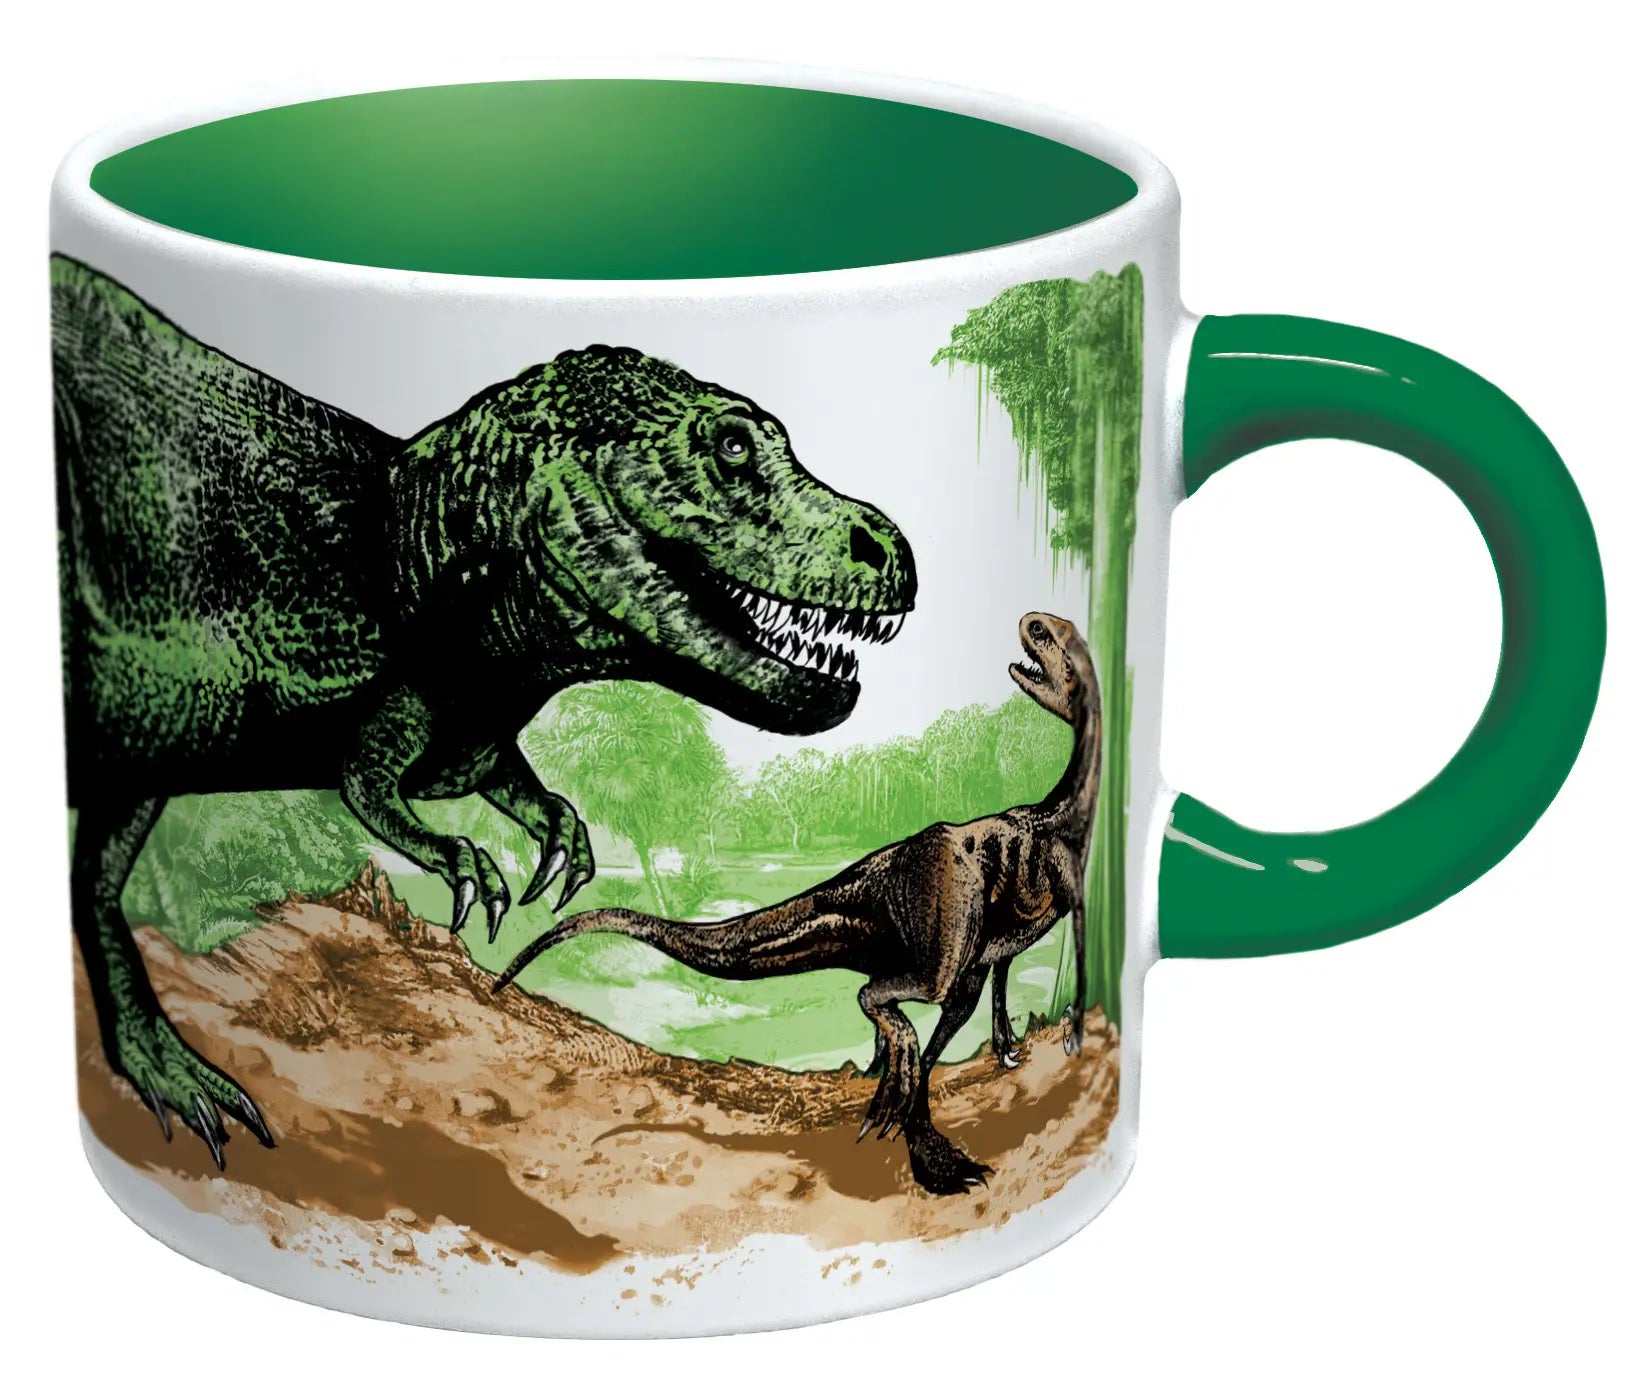 A ceramic mug with green handle and inside showing a large t.Rex and velociraptor in a jungle scene in full color 